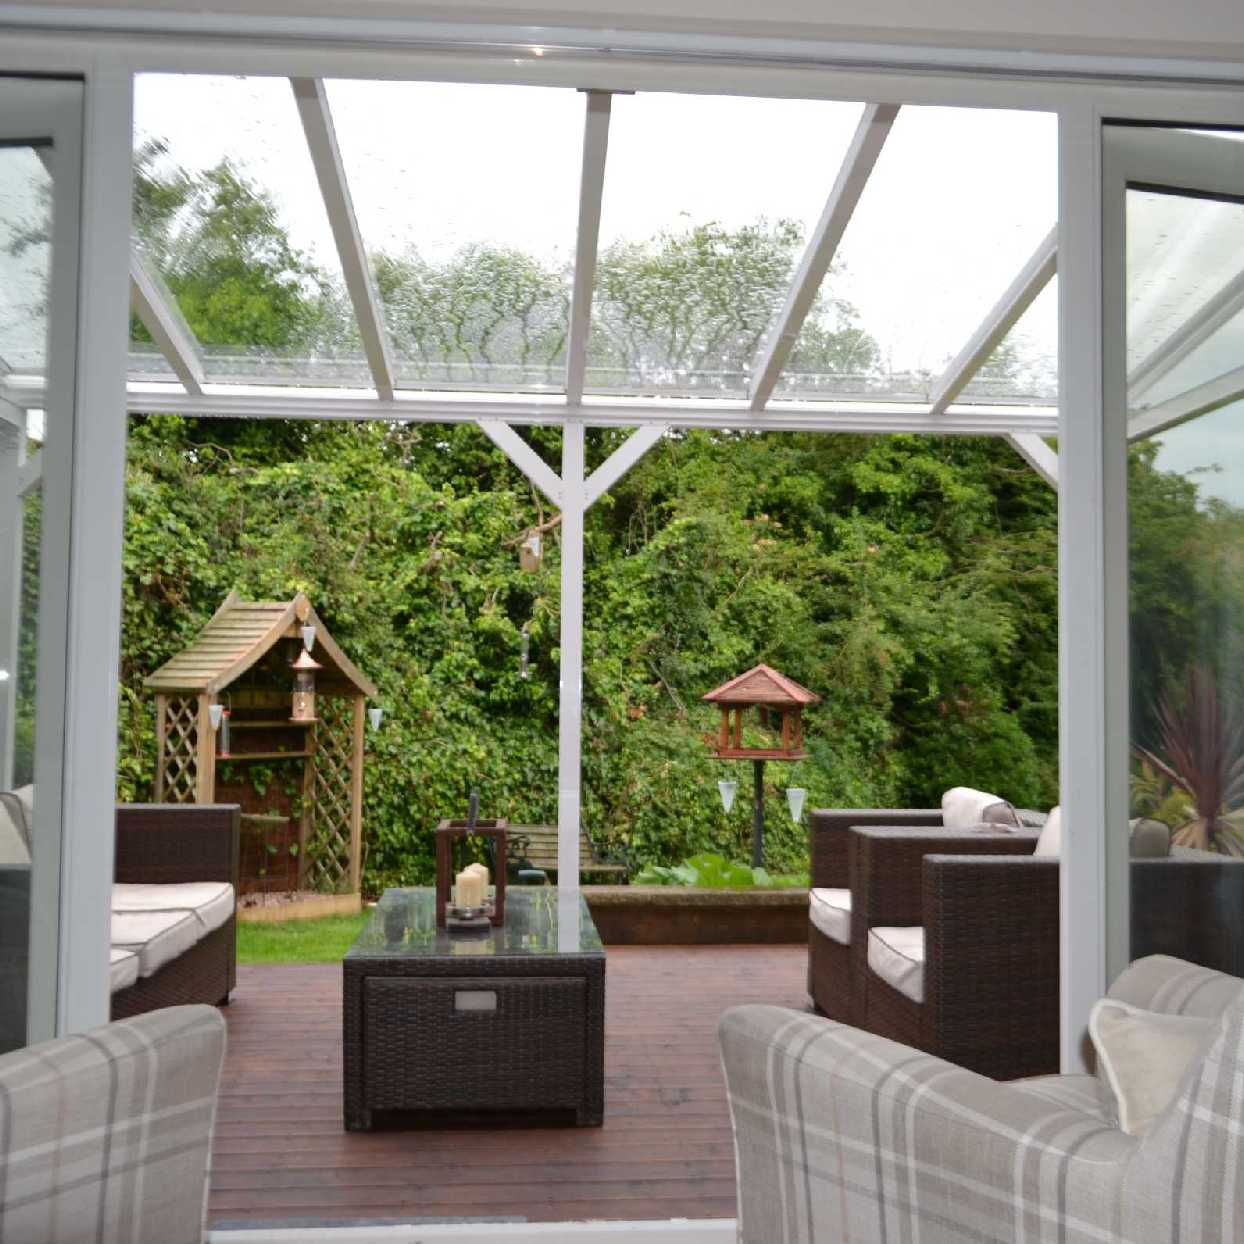 Buy Omega Smart Free-Standing, White MonoPitch Roof Canopy with 6mm Glass Clear Plate Polycarbonate Glazing - 4.2m (W) x 3.0m (P), (6) Supporting Posts online today